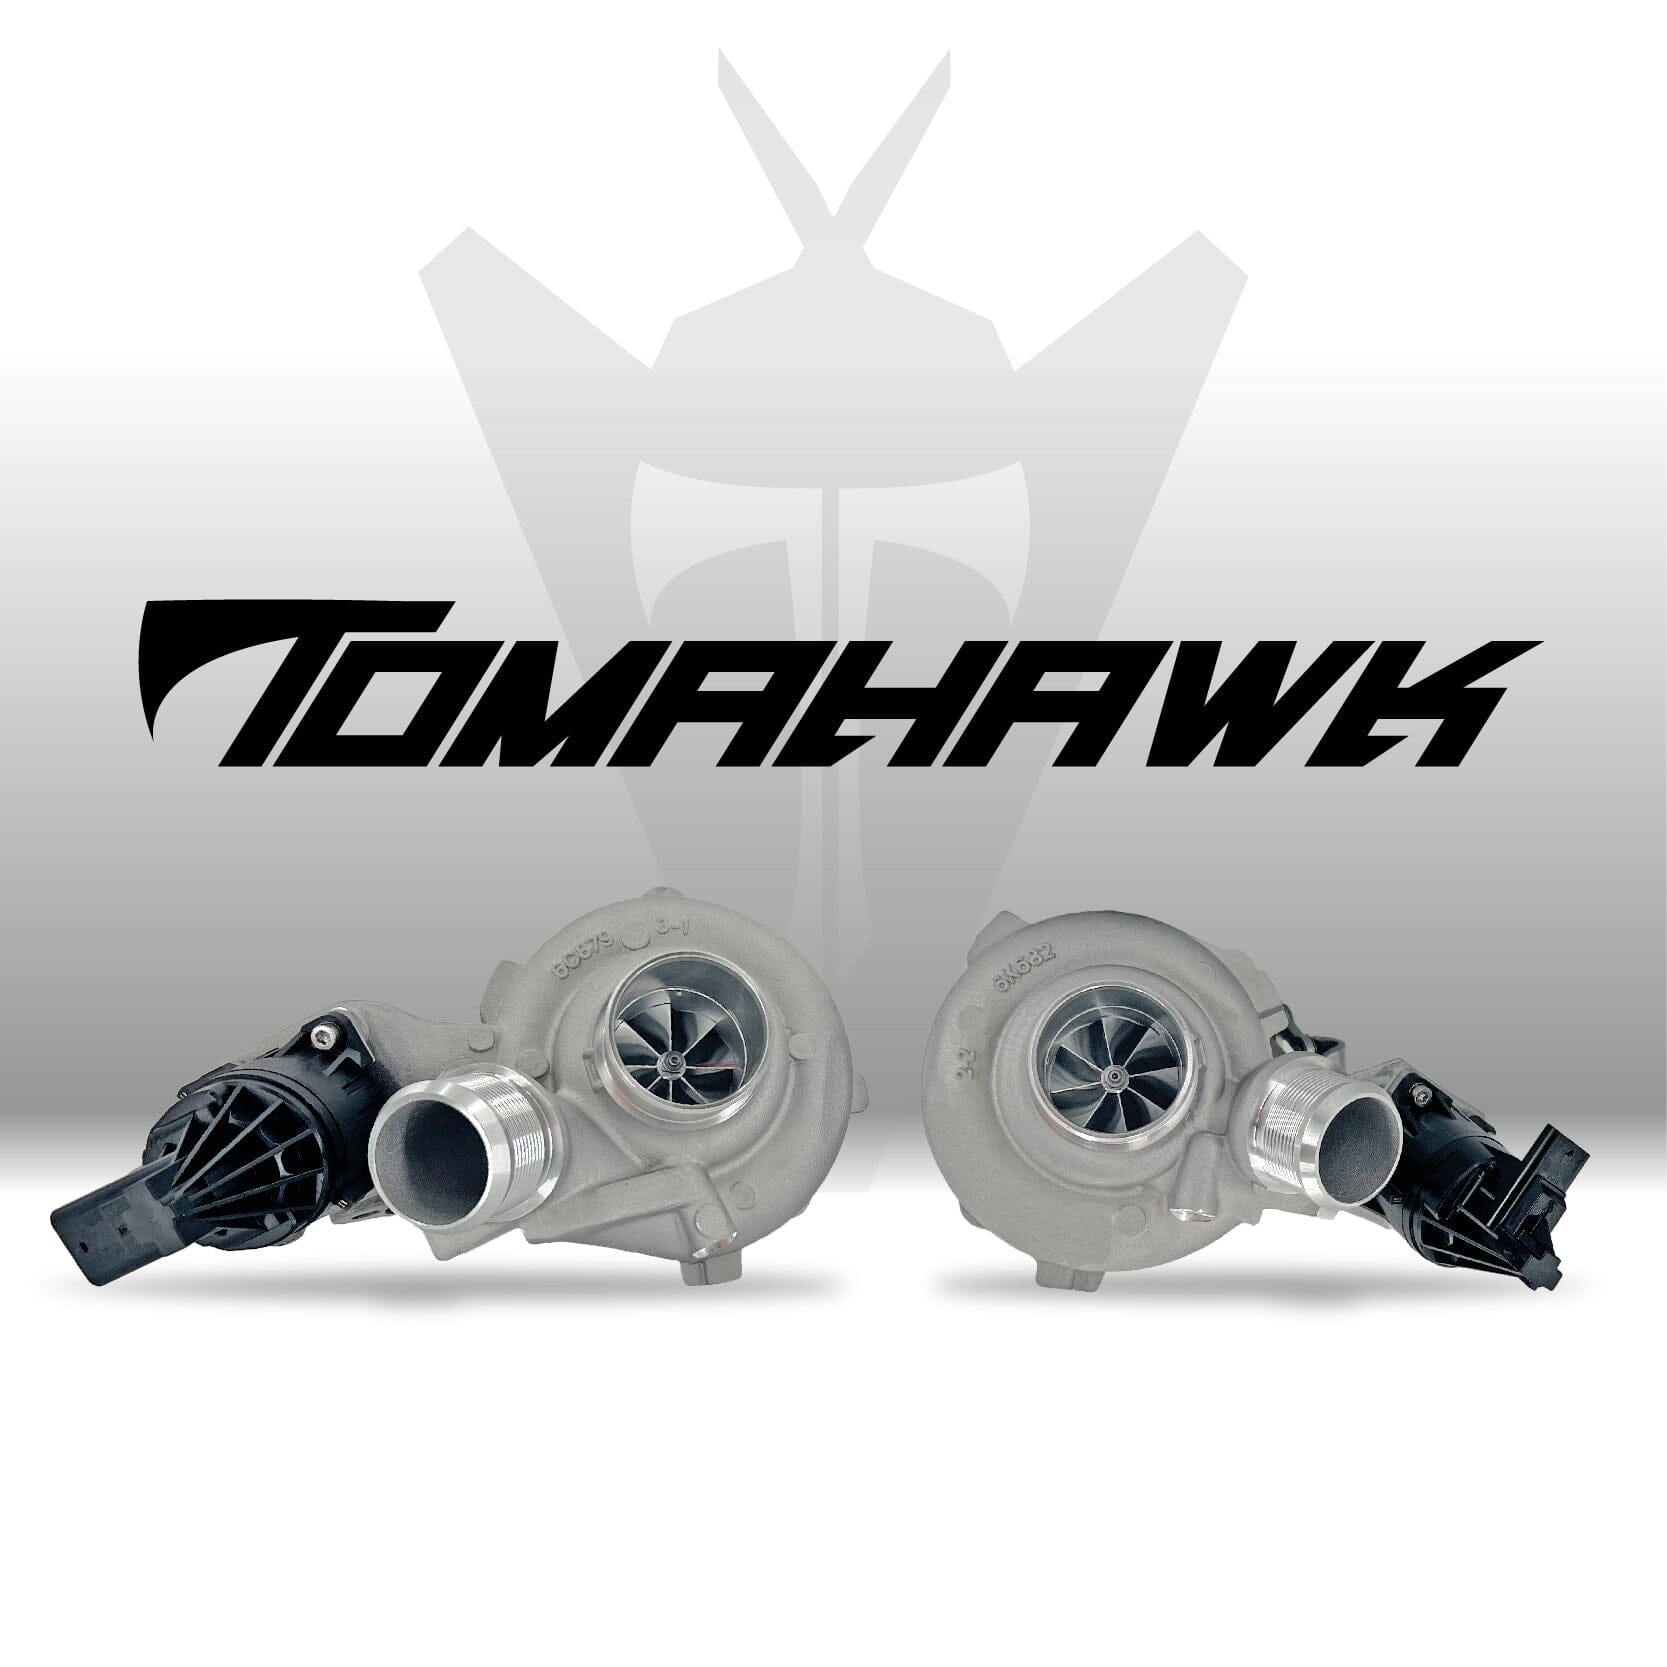 Stealth Tomahawk Twin Turbo Kit (3.5L Ford EcoBoost) Turbocharger Calibrated Power 